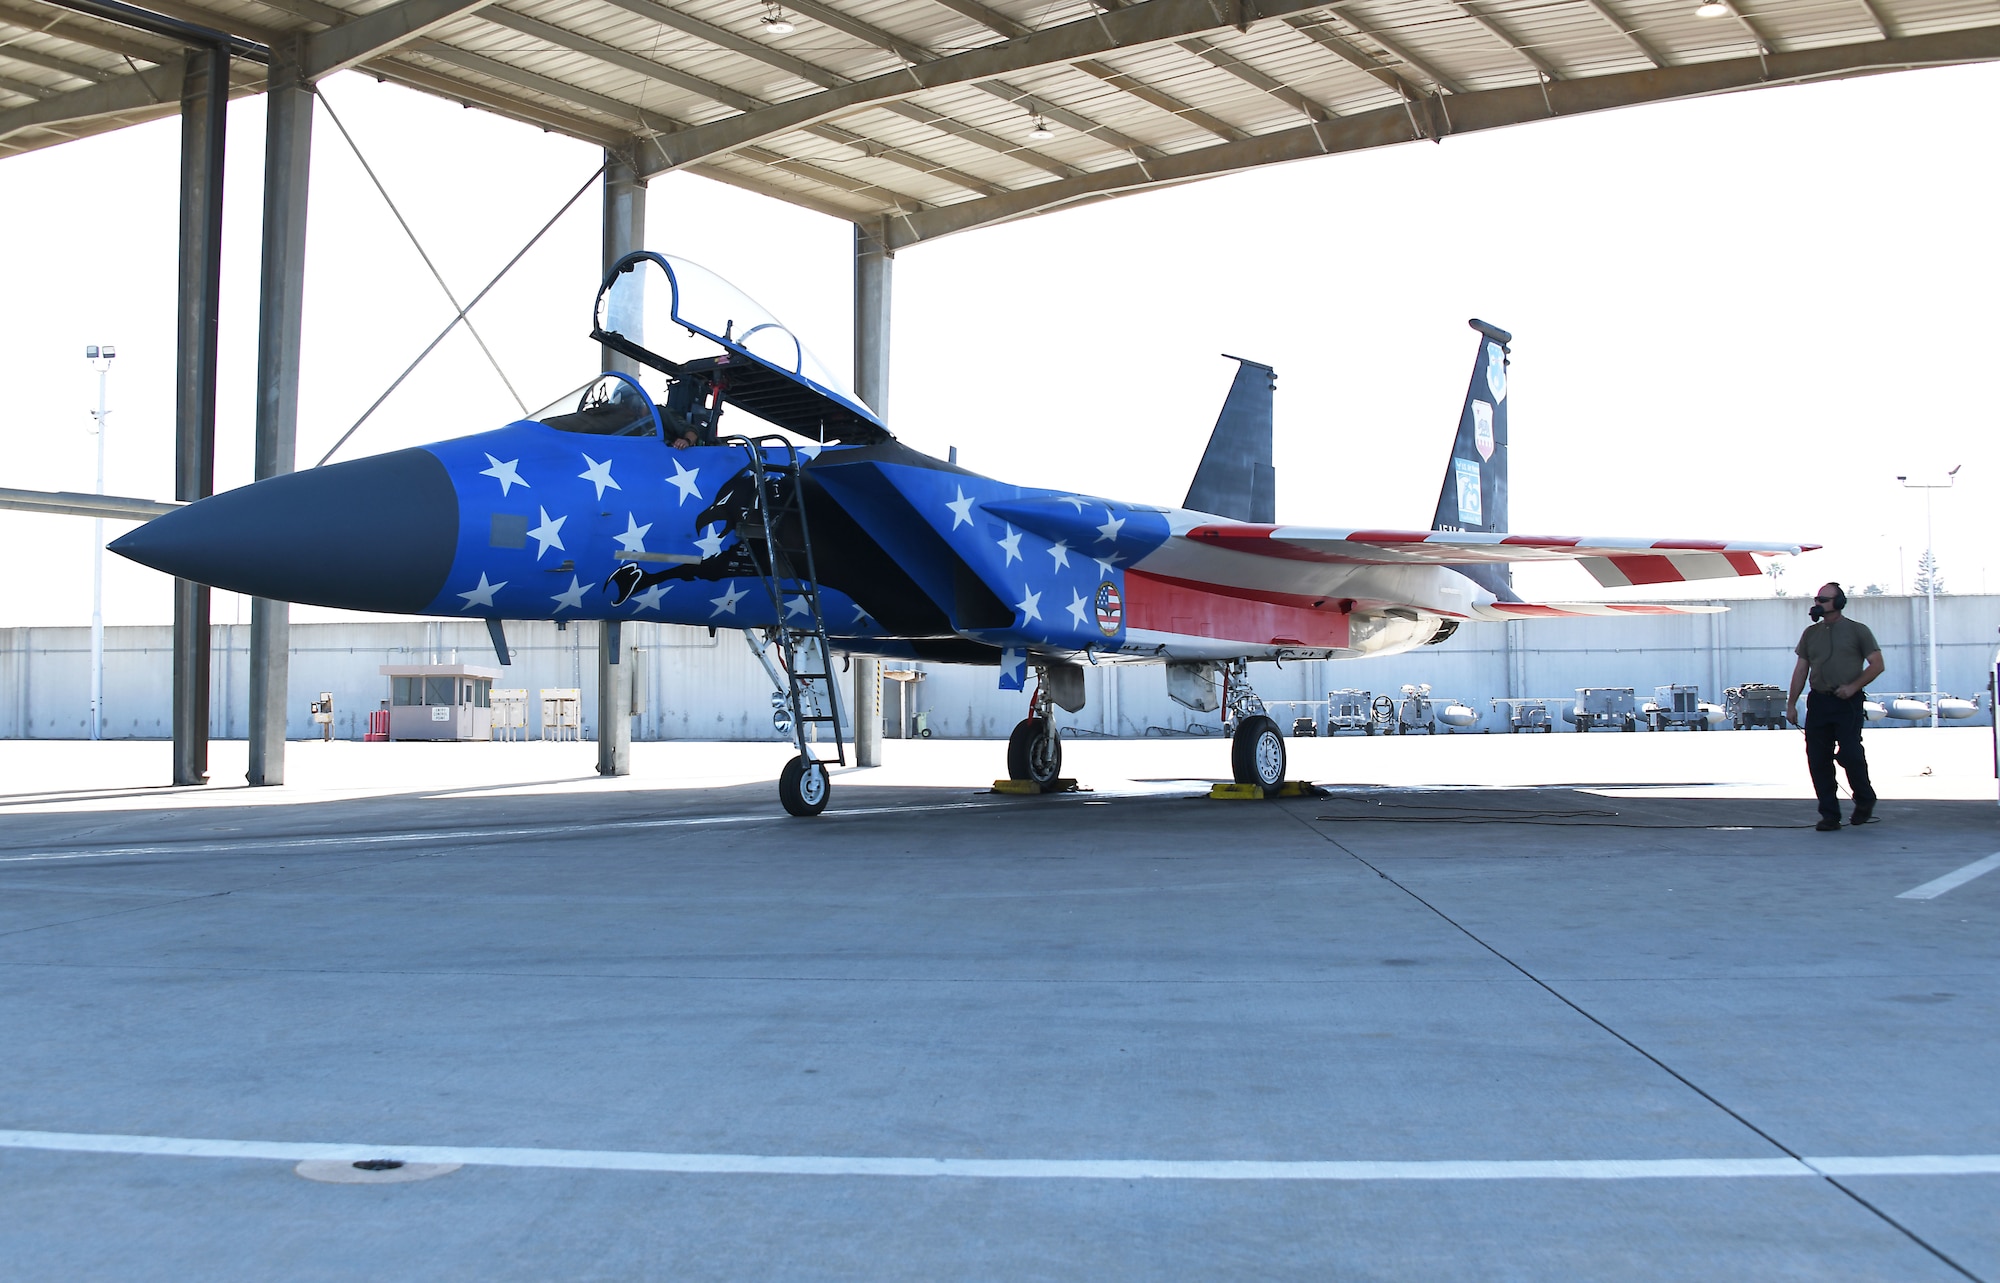 An F-15C fighter aircraft with a red, white, and blue paint scheme is parked under an aircraft bay. An airman stands to the right side of the aircraft.